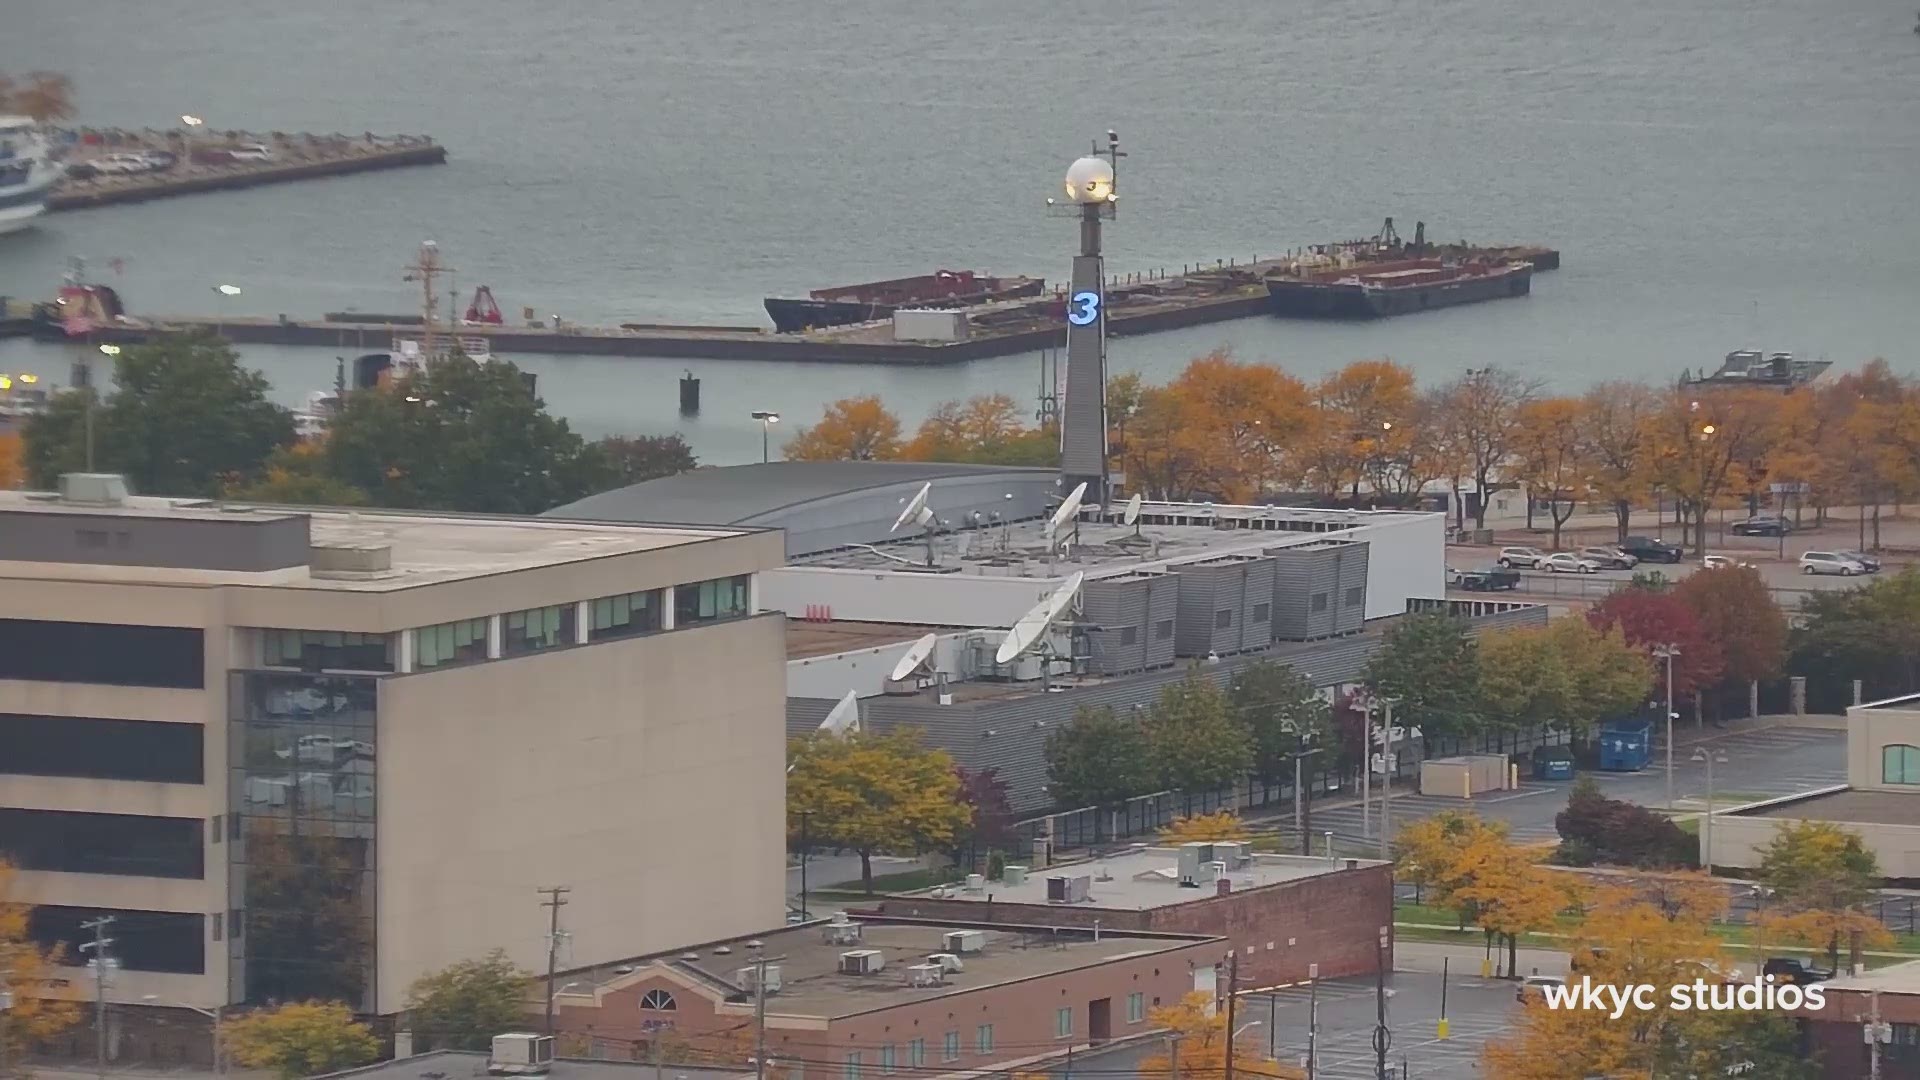 Nice shot of WKYC Studios at 13th and Lakeside in Cleveland along with the surrounding fall foliage bursting in color. #3weather